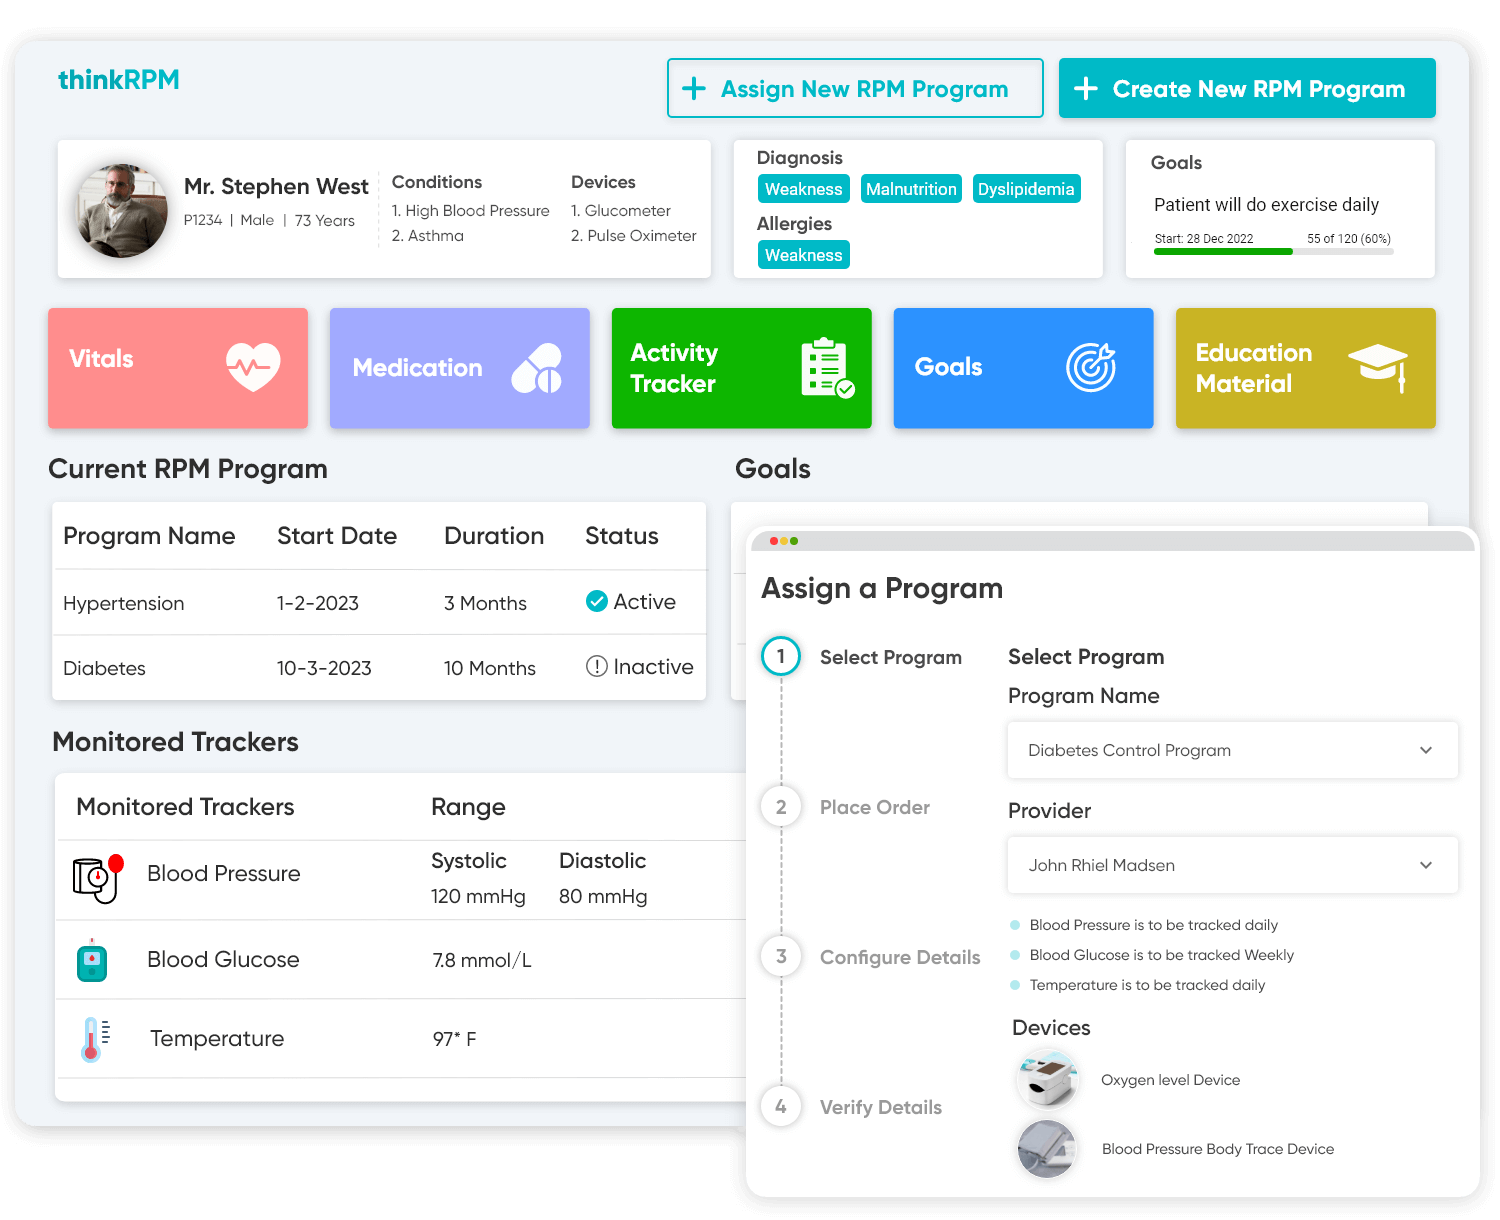 Patient’s current RPM program with vital tracking, current medication, activity tracker, end-goals with an option to create and assign new RPM program